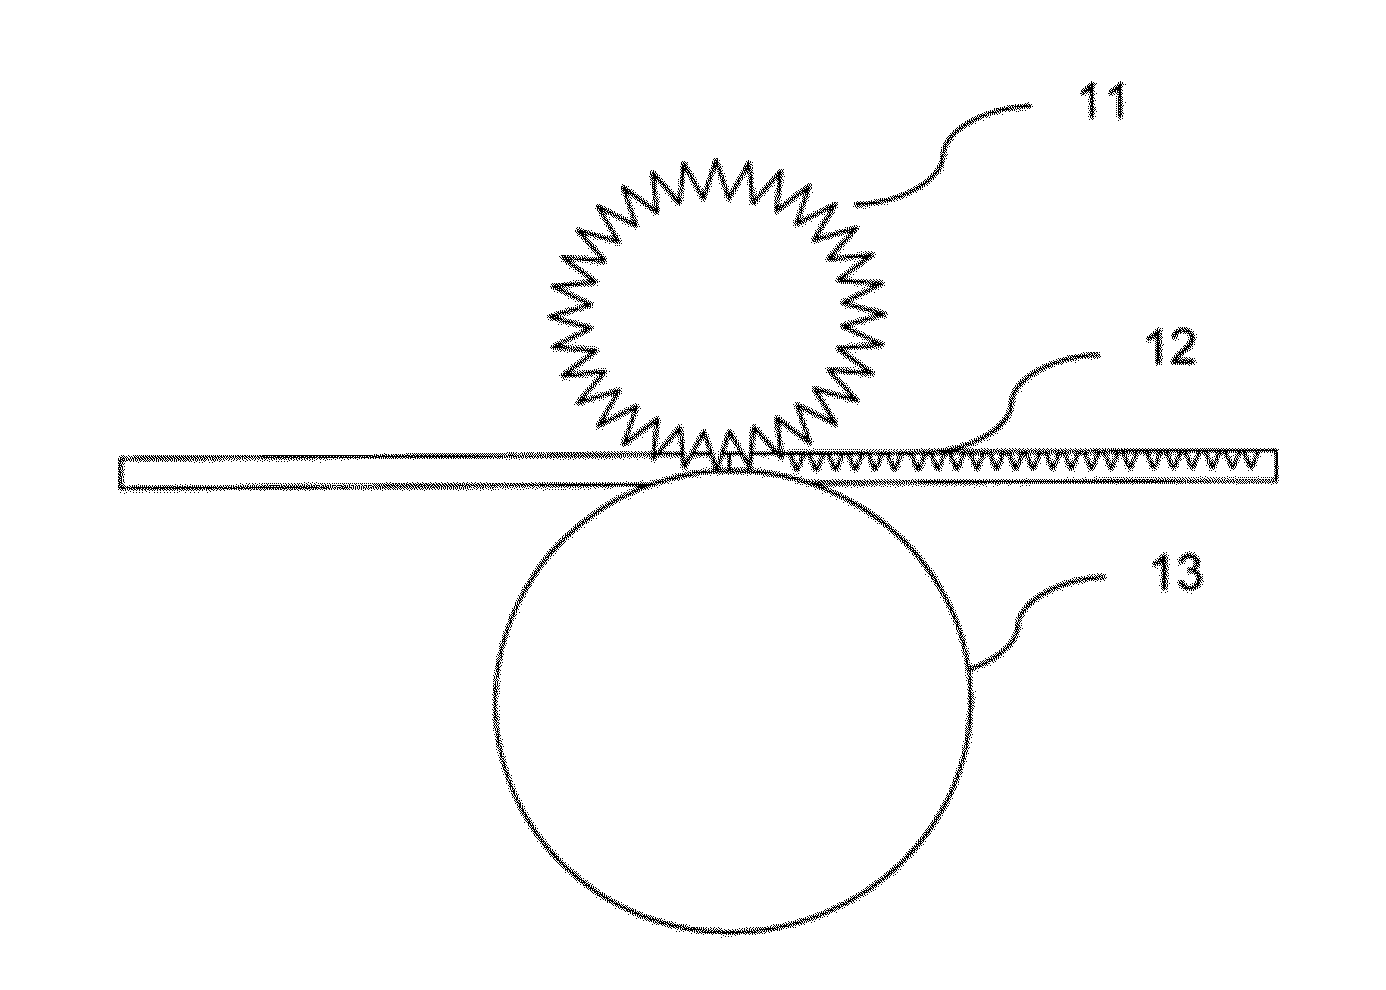 Method of manufacturing solid solution perforator patches